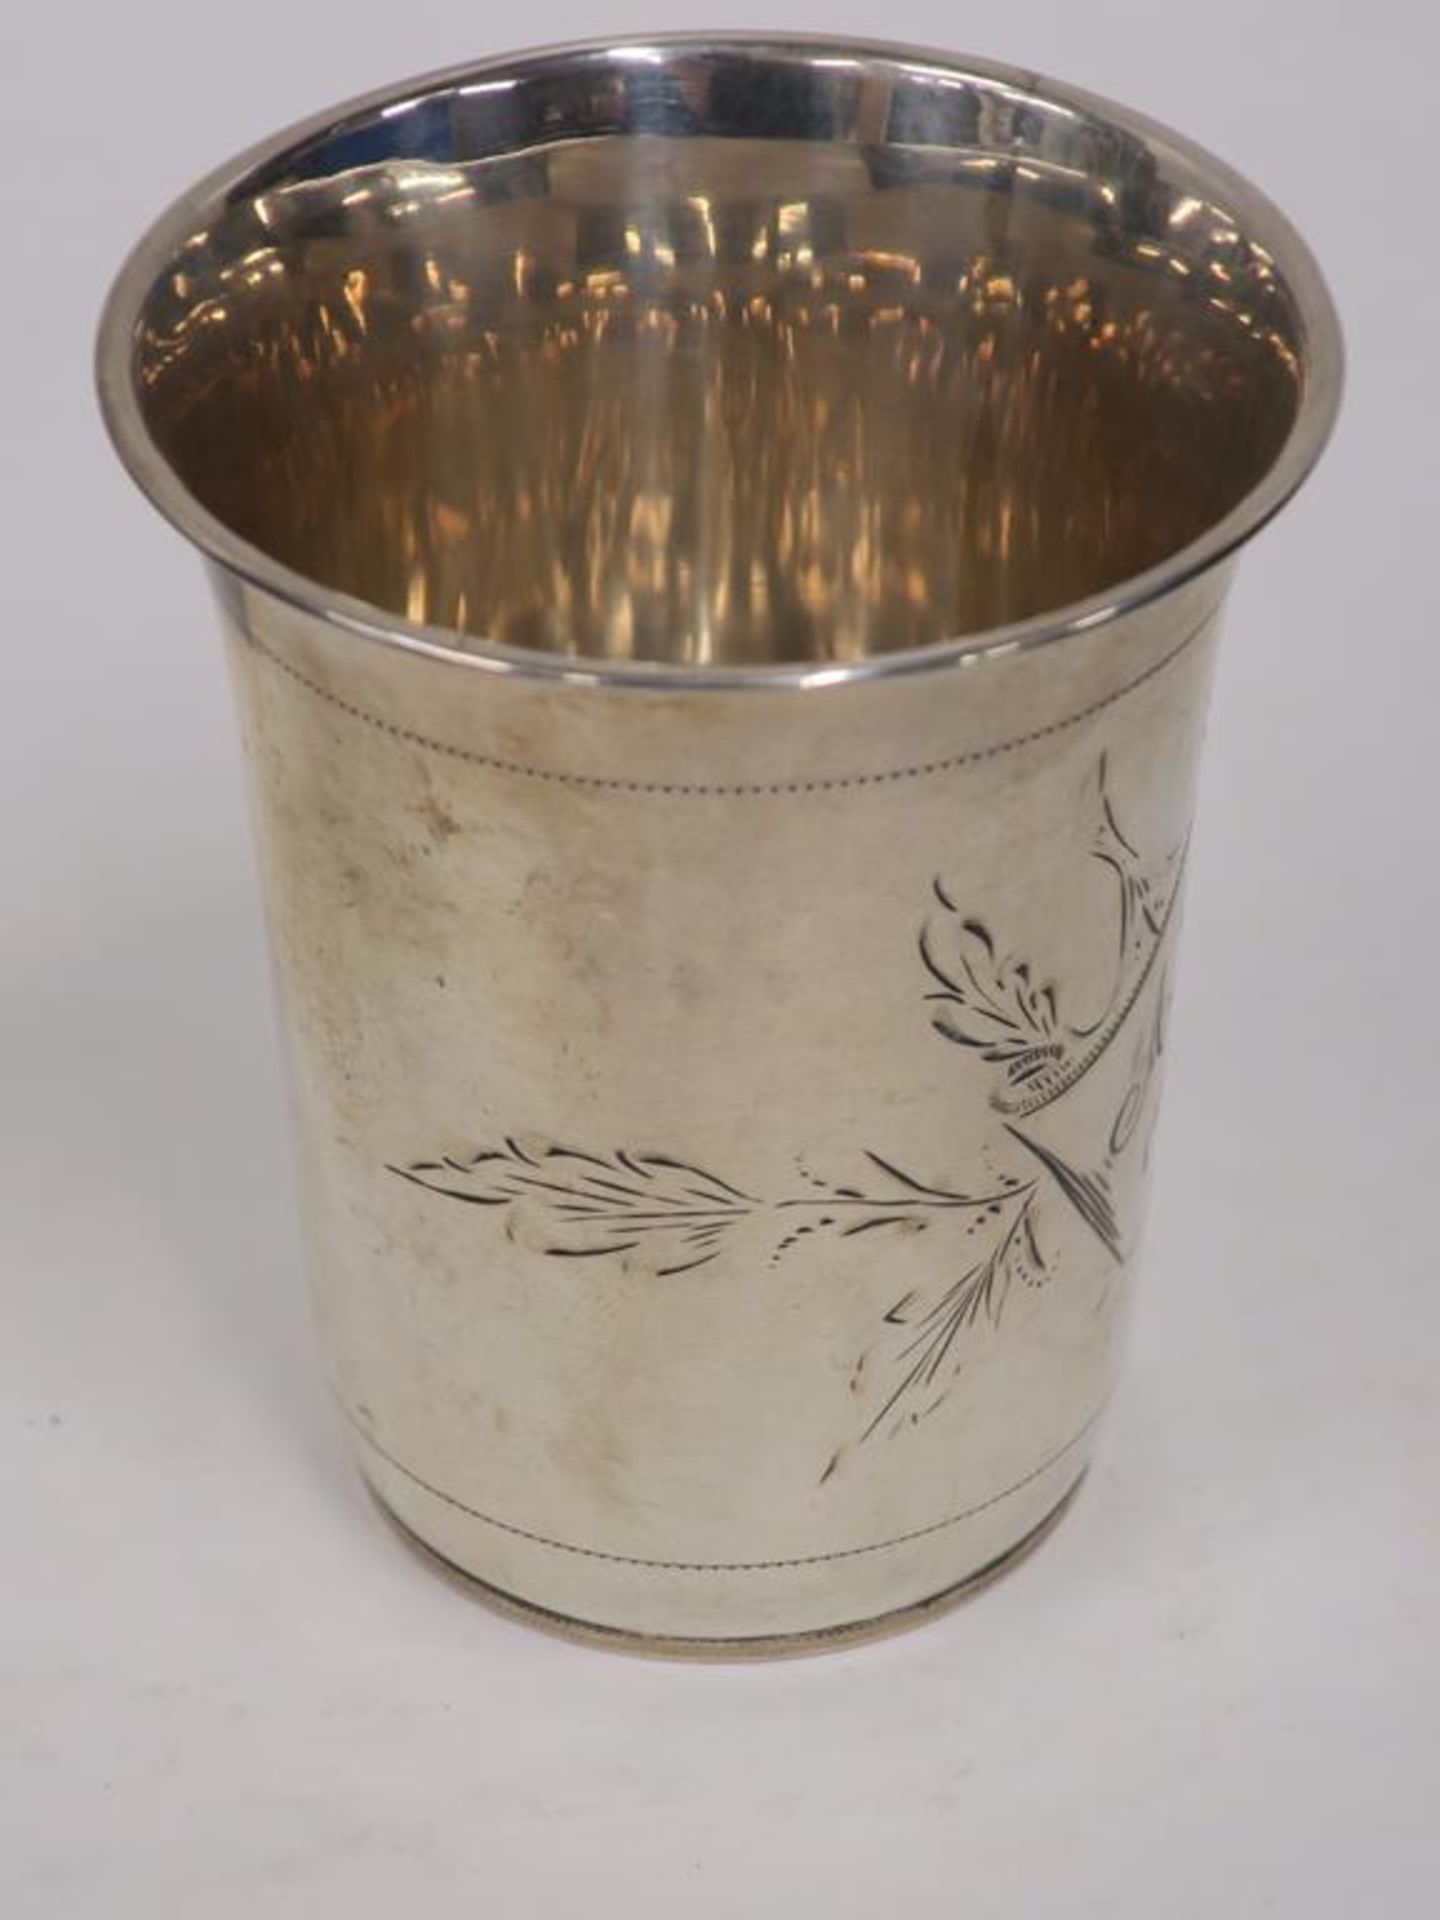 A 19th Century Portuguese Silver Beaker (c 1895, approx 30g) (est £30-£60) - Image 3 of 4